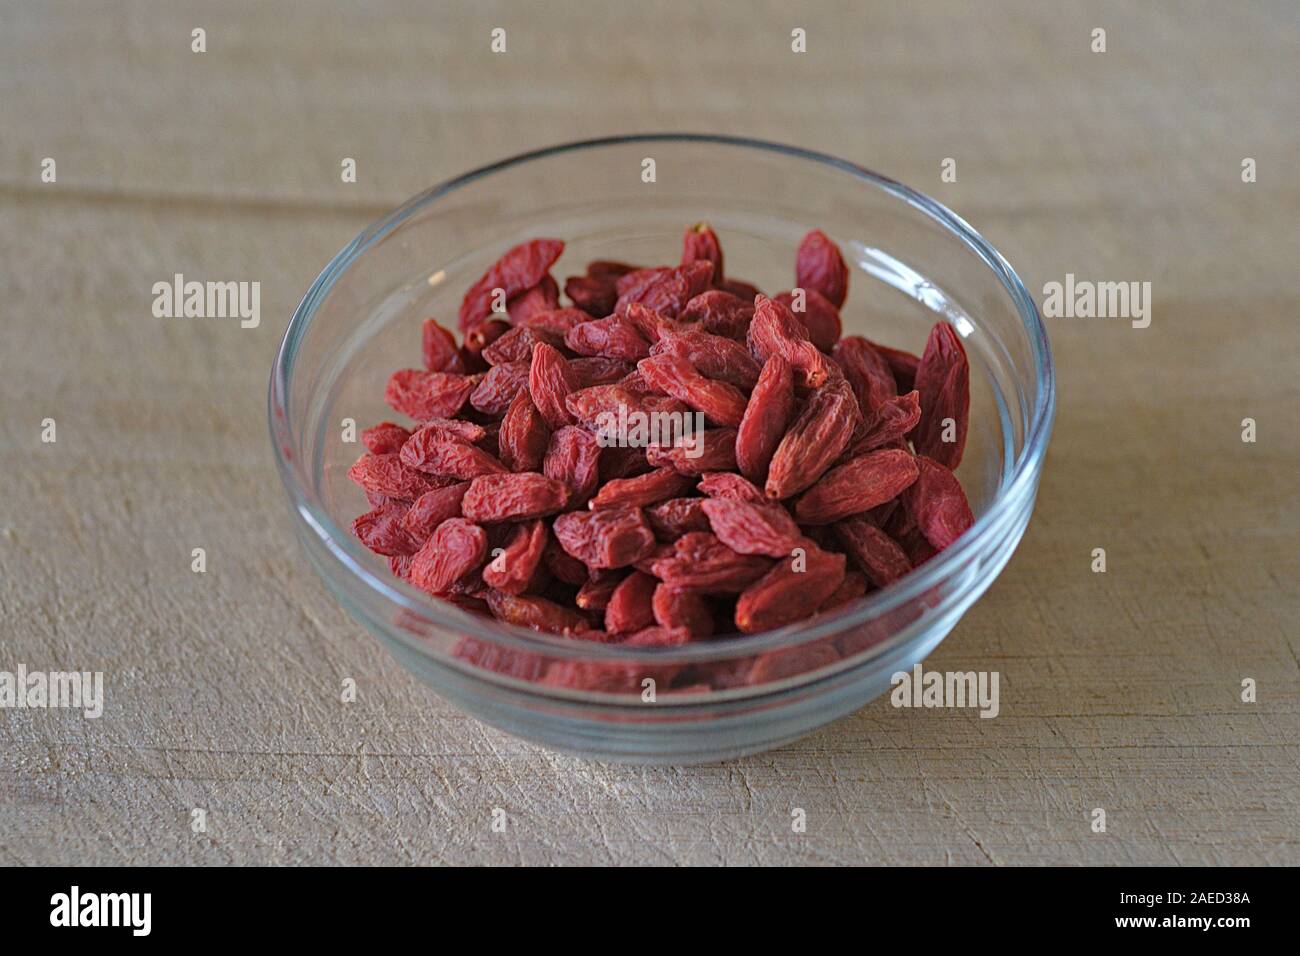 Dried Goji Berries (Lycium barbarum) in a small glass bowl on a wooden chopping board. Stock Photo